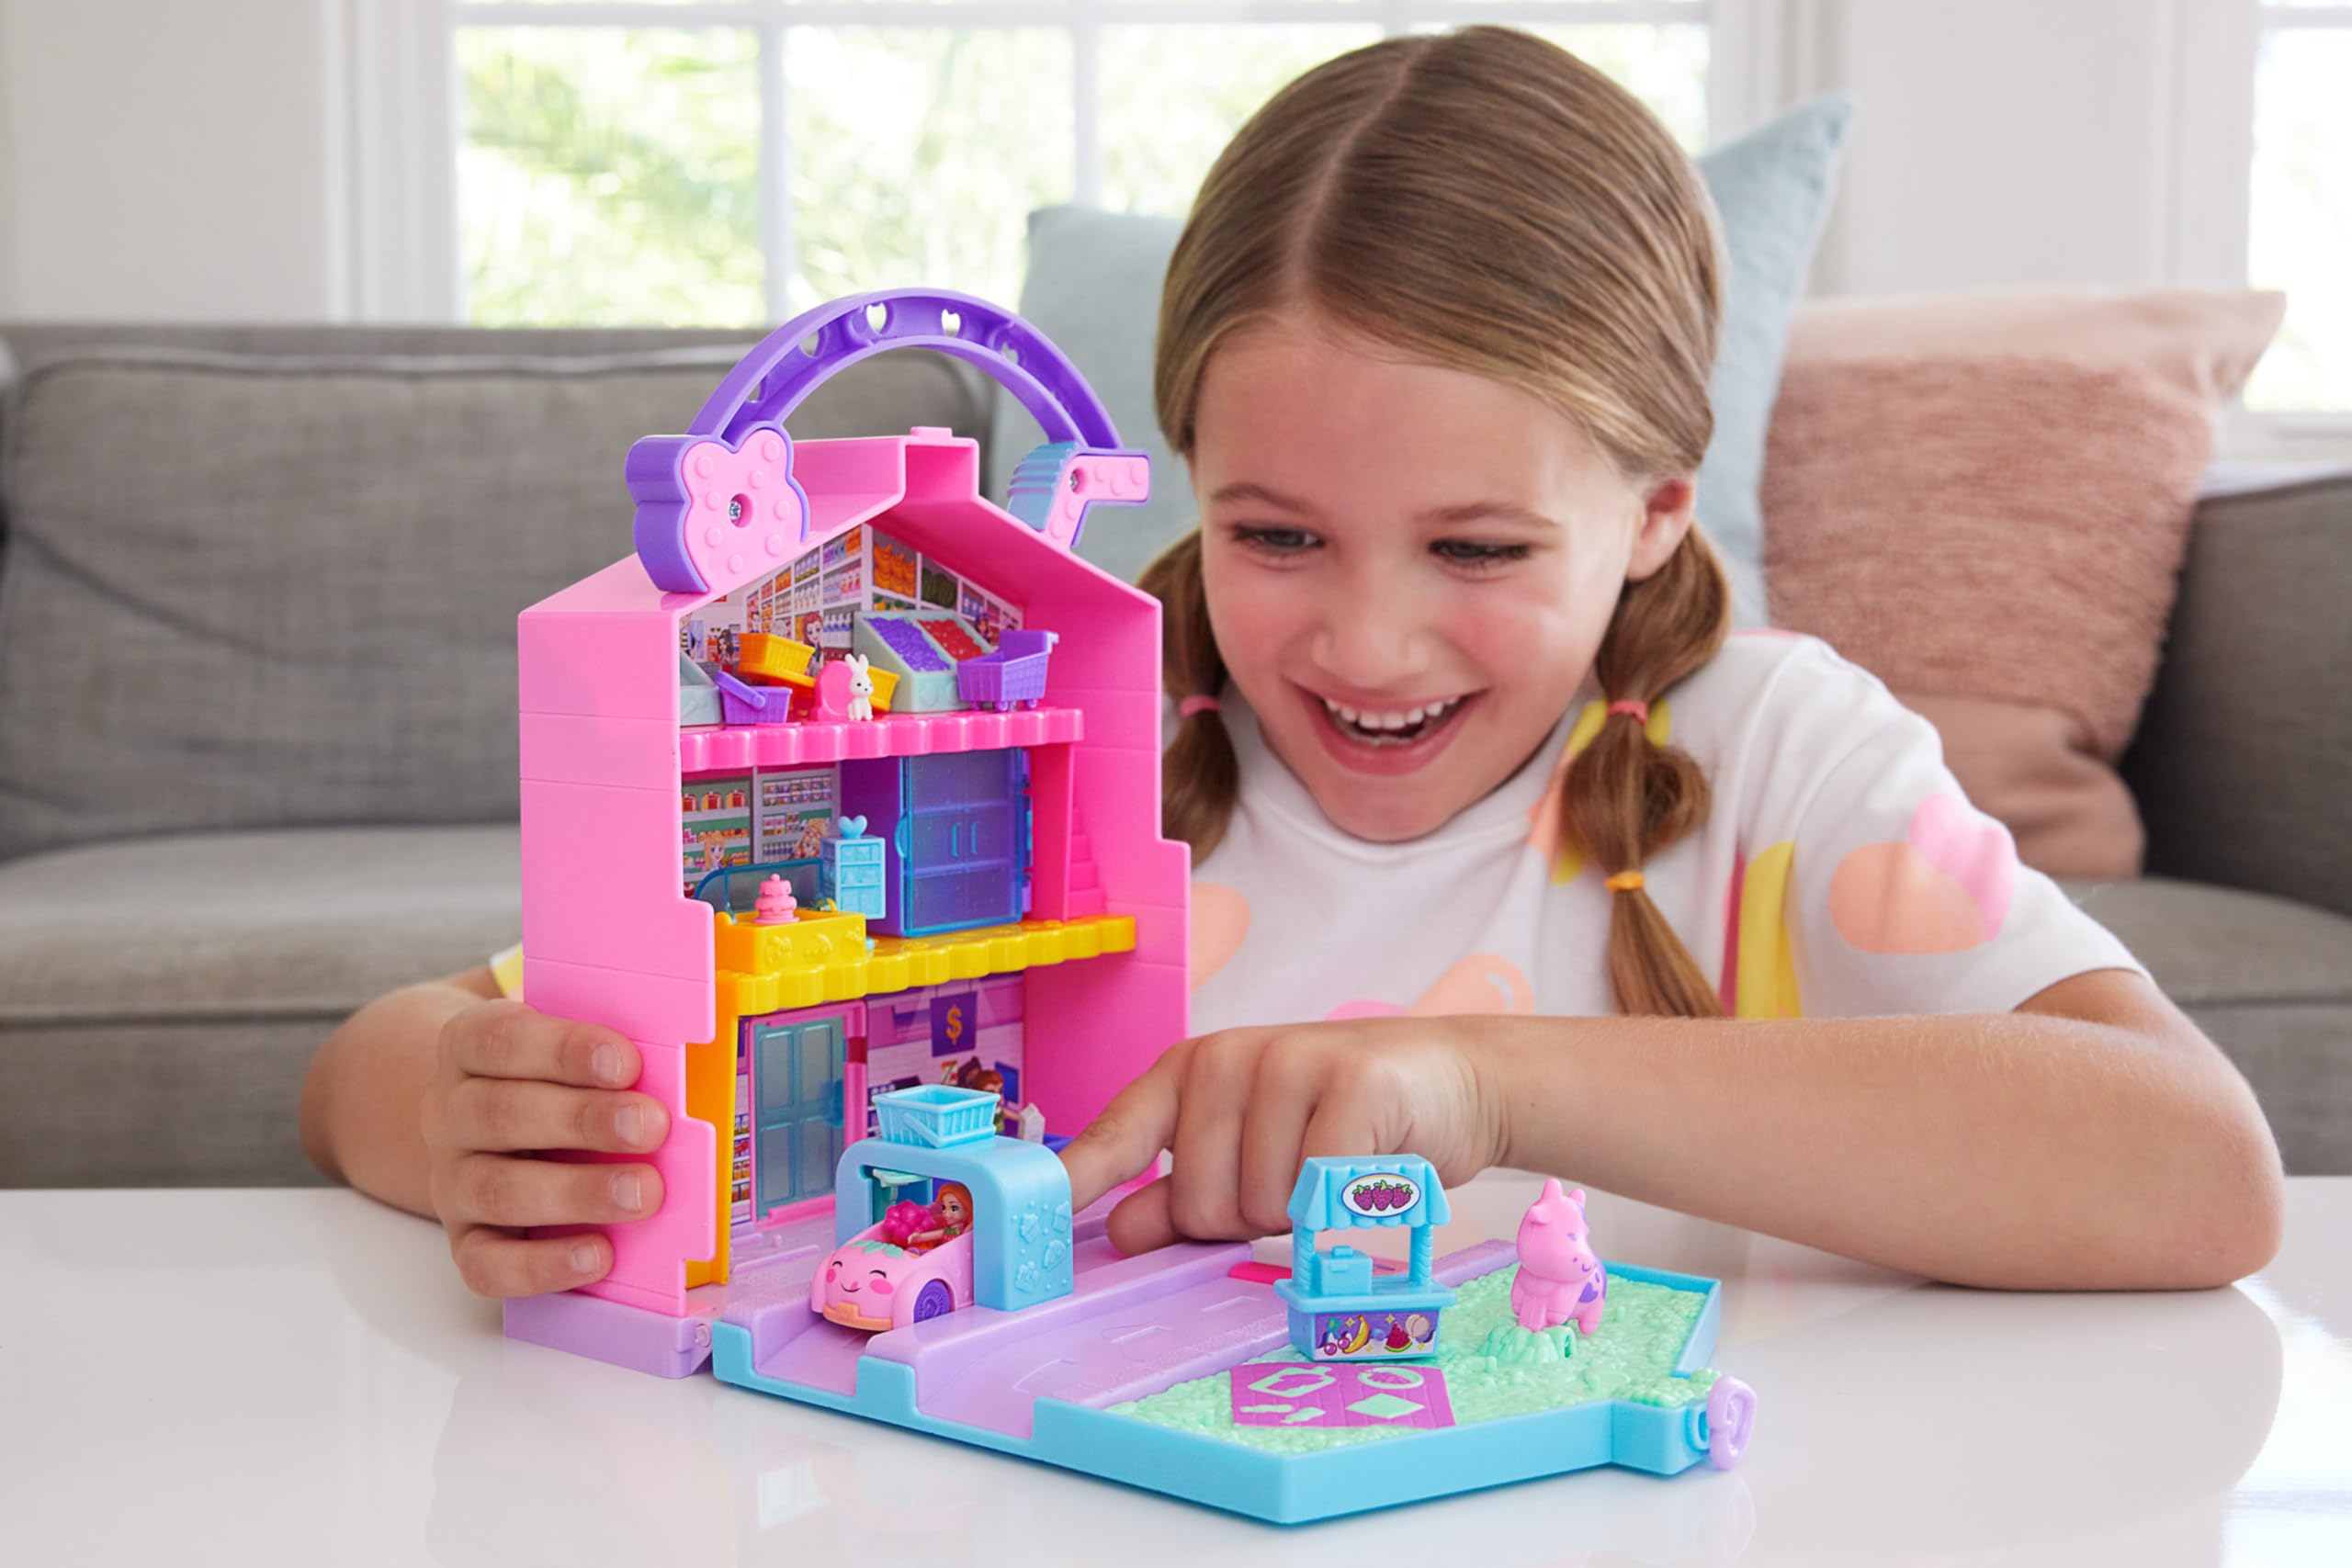 Polly Pocket Dolls & Playset, Food Toy with 2 Micro Dolls, 12 Accessories with Toy Car and Pet, Pollyville Fresh Market